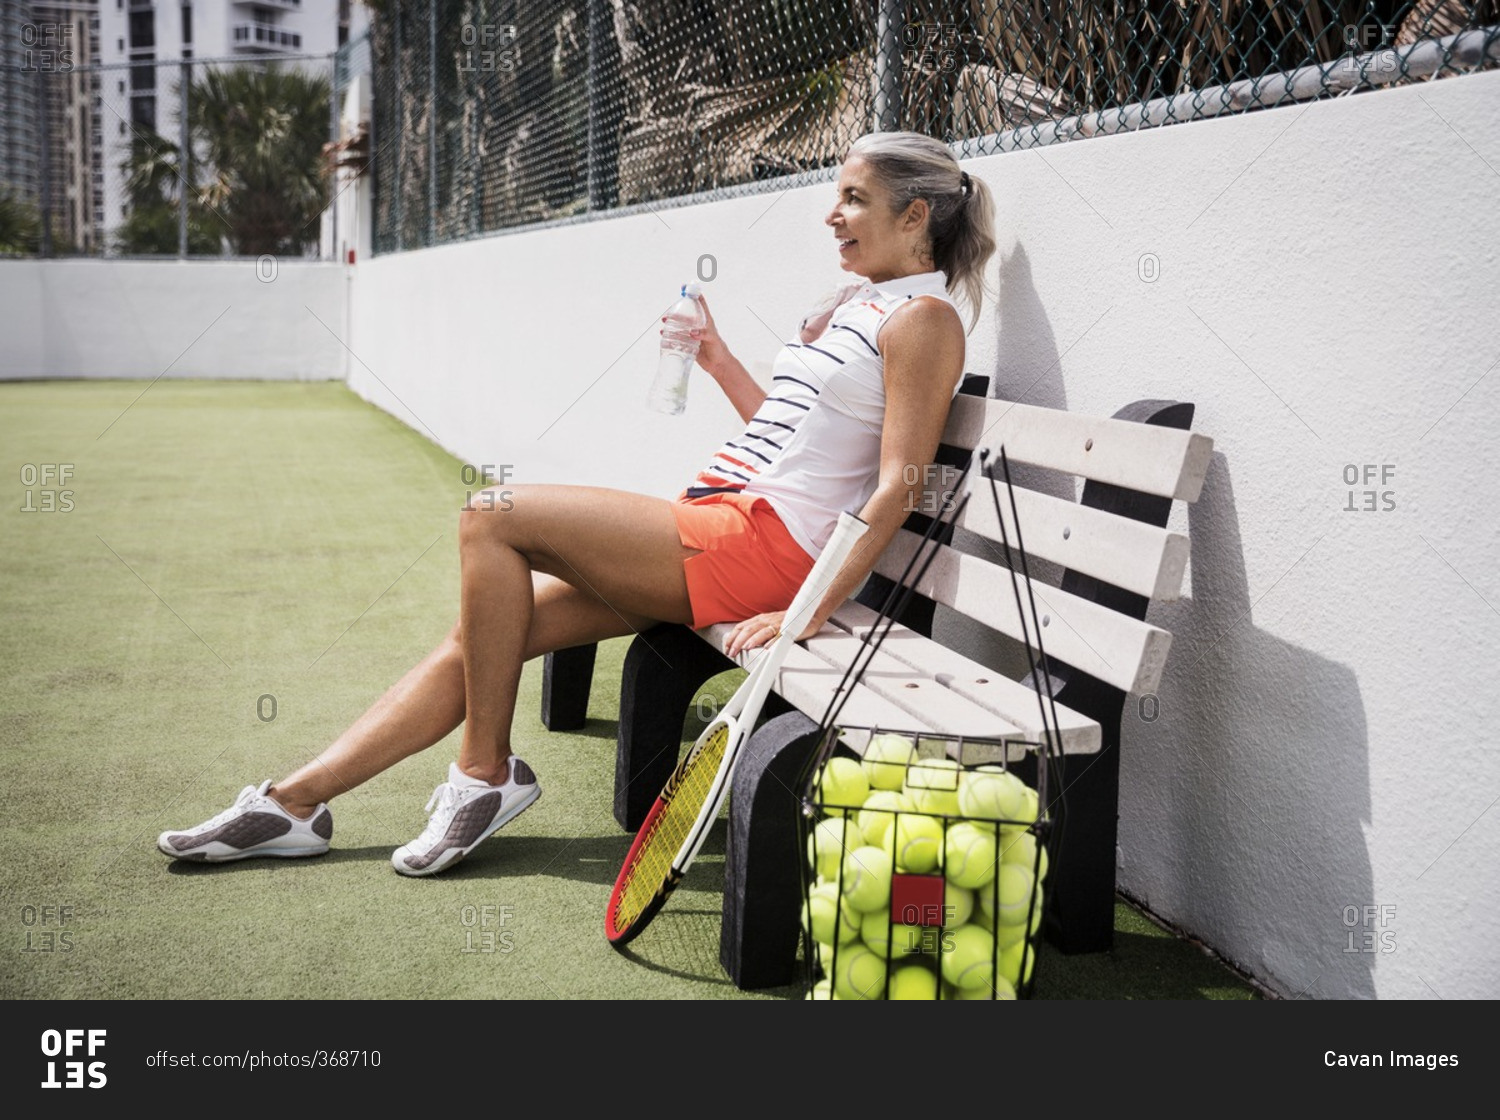 Smiling mature woman holding water bottle while sitting on bench at tennis court